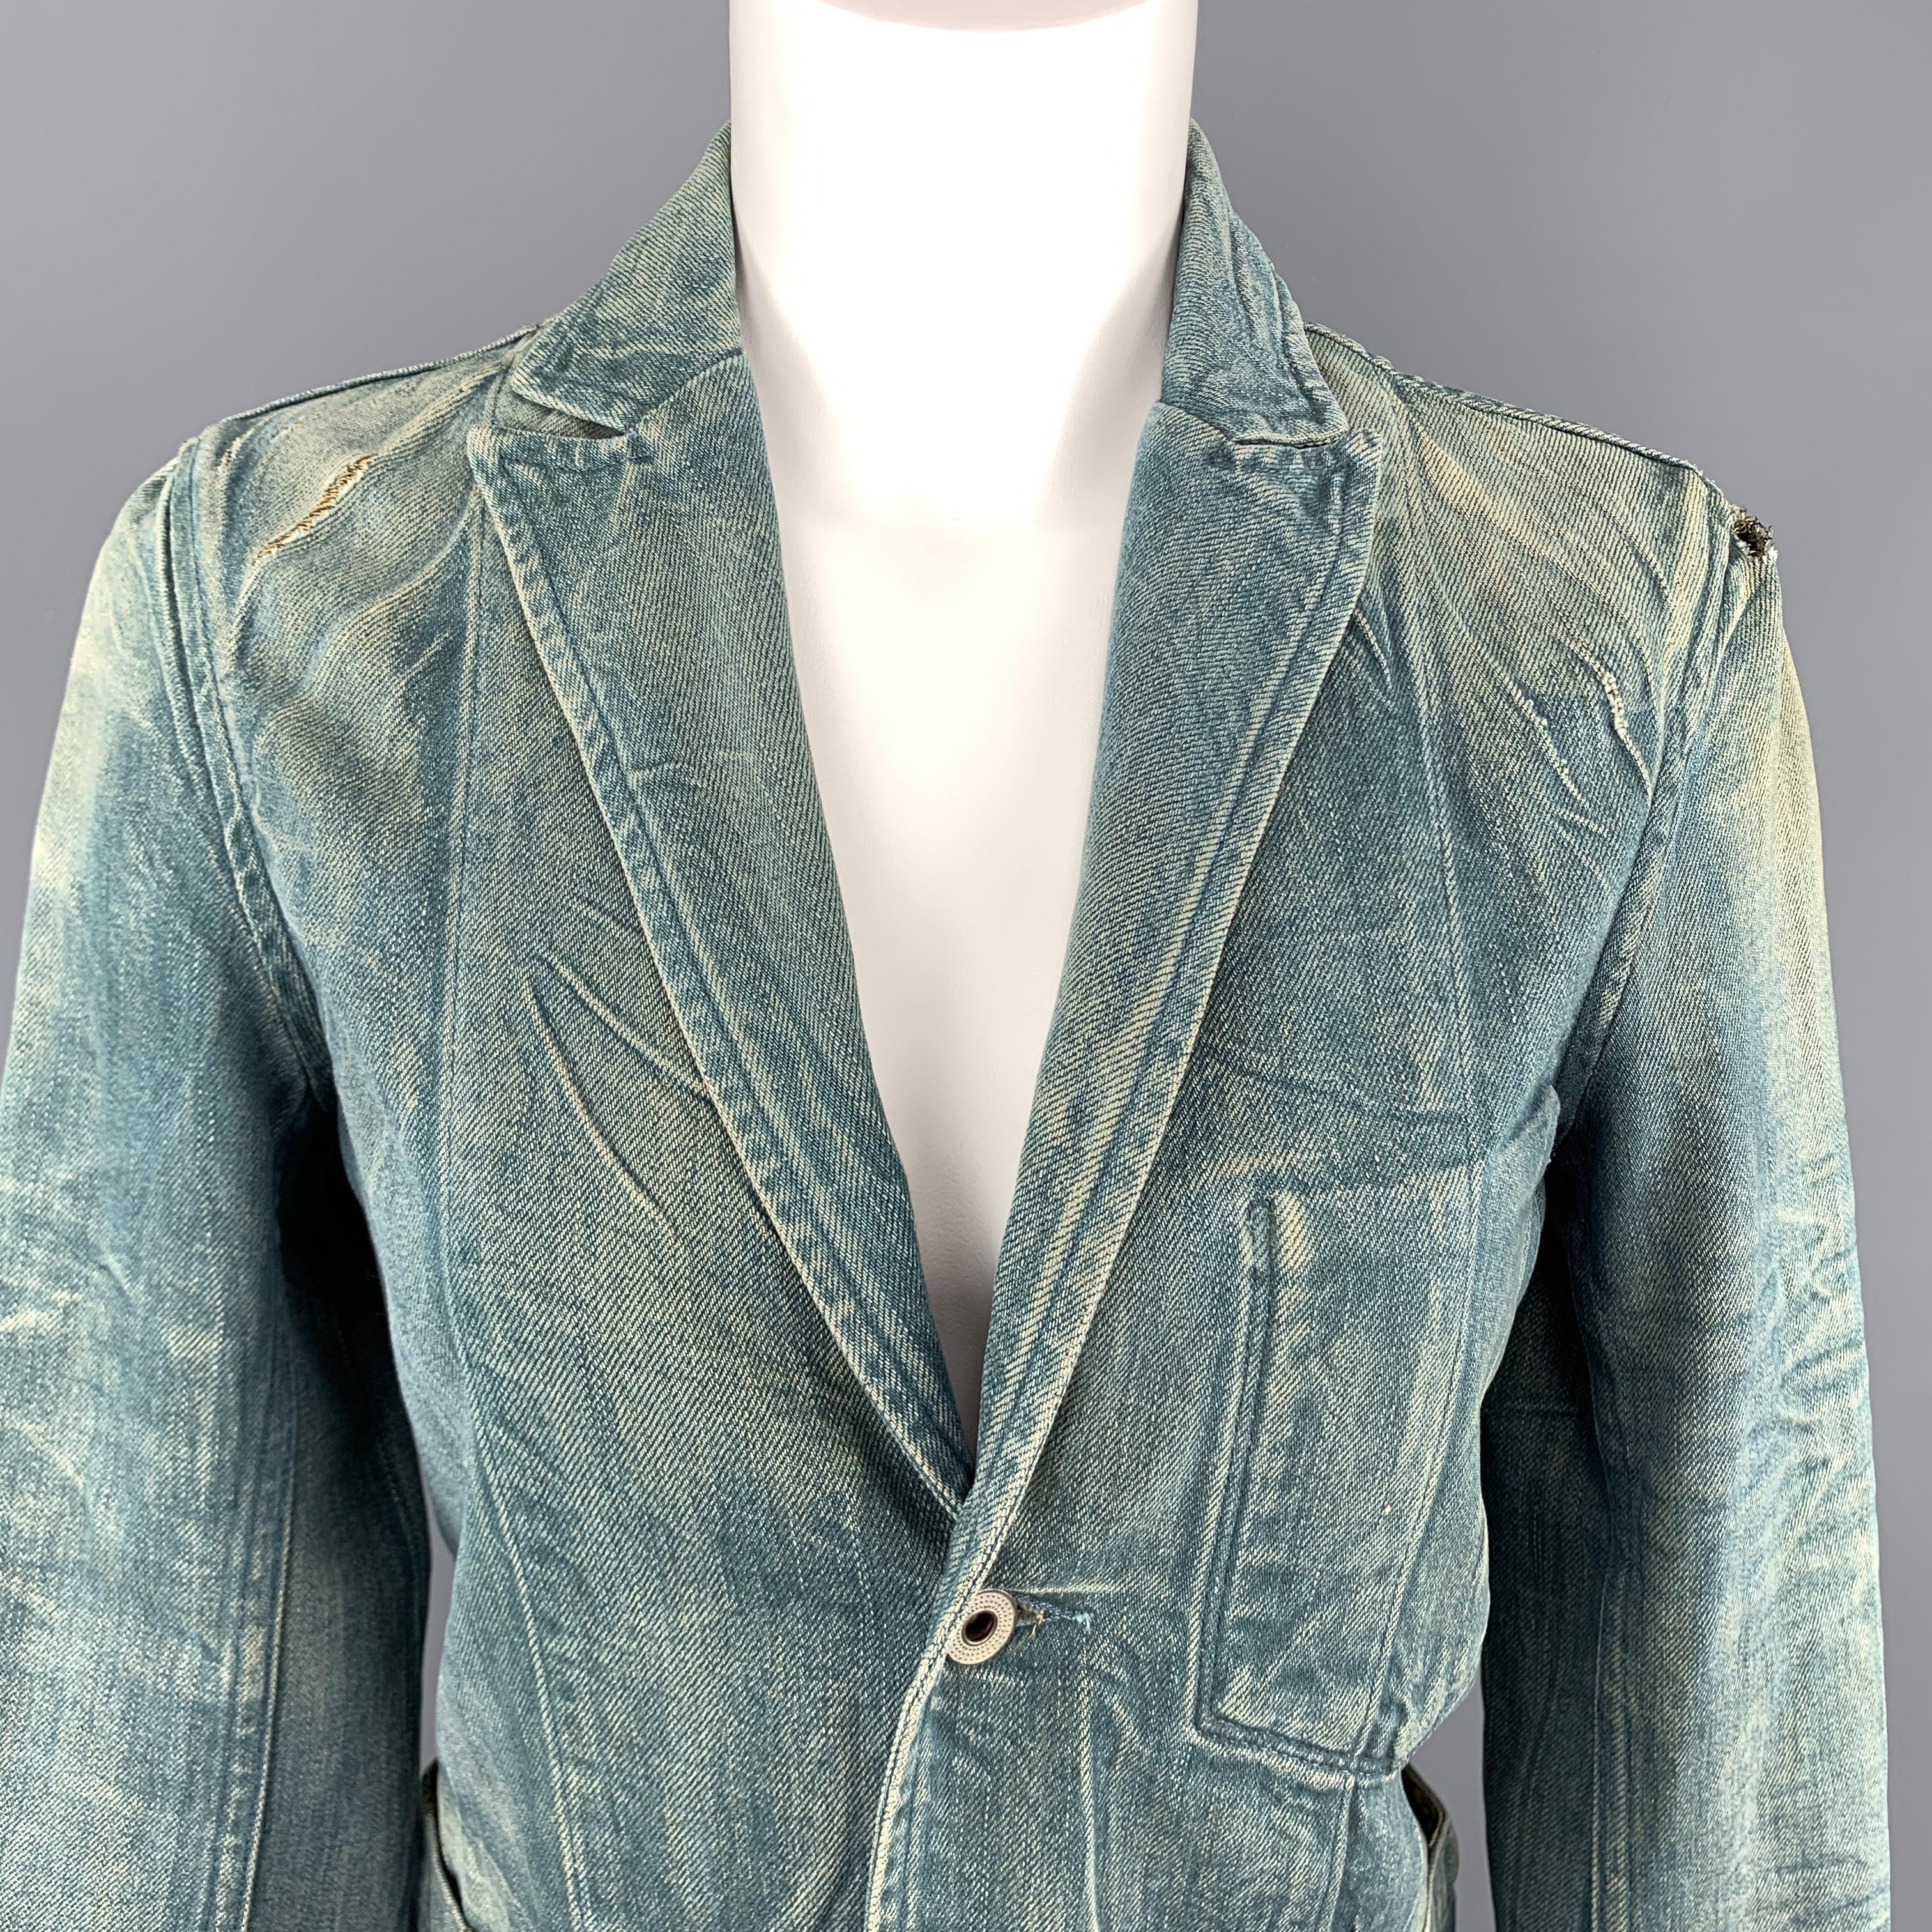 RRL work style jacket comes in dirty washed denim with distressing throughout,patch pockets, and cropped sleeves.
 
Excellent Pre-Owned Condition.
Marked: S
 
Measurements:
 
Shoulder: 16 in.
Bust: 34 in.
Sleeve: 18 in.
Length: 25.5 in.